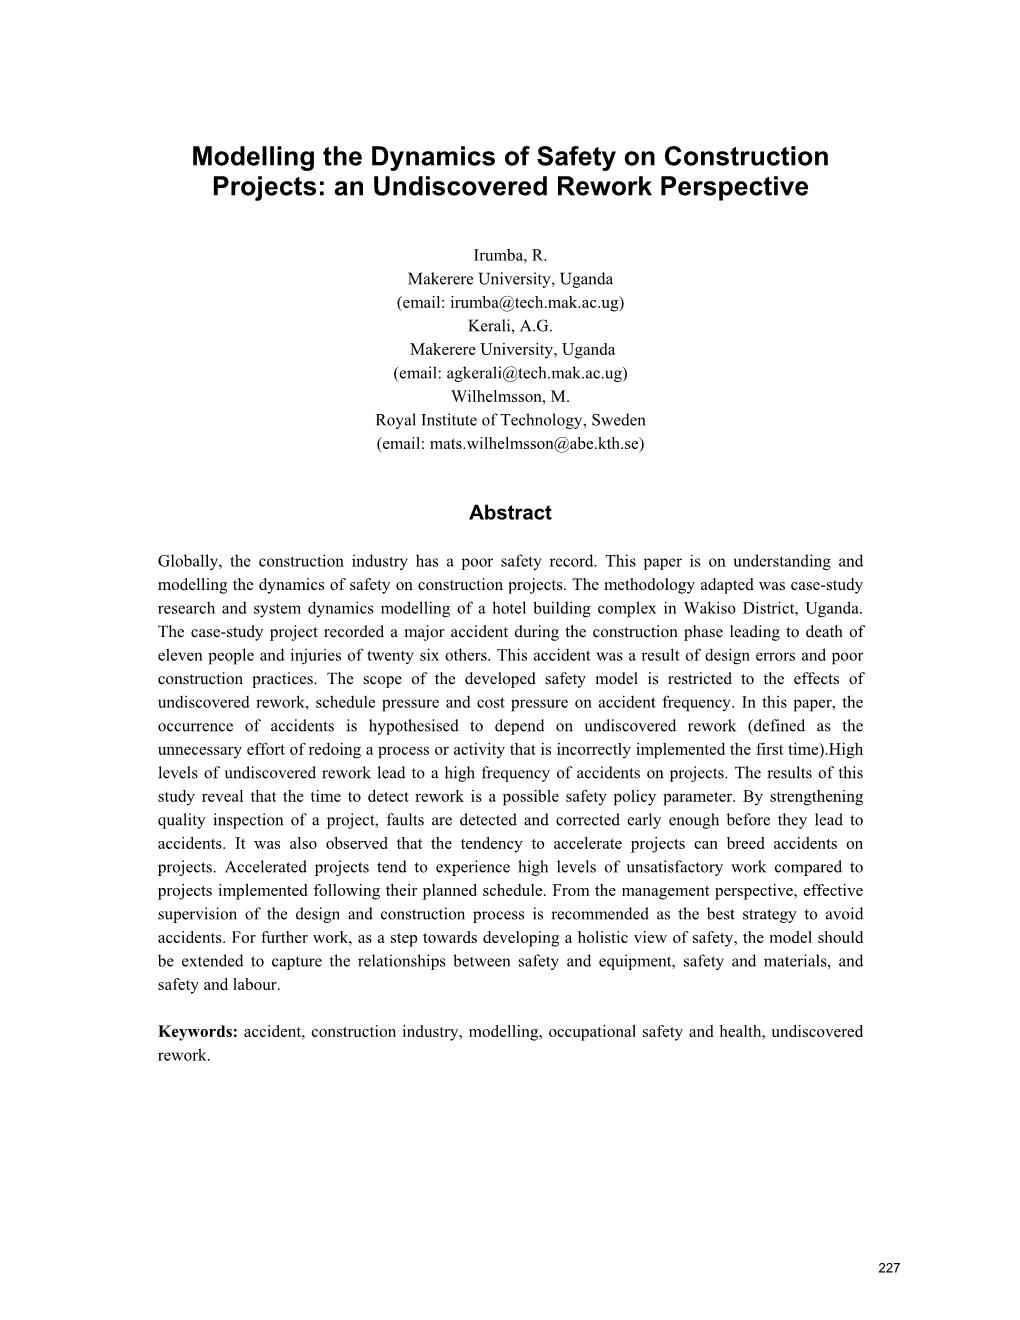 Modelling the Dynamics of Safety on Construction Projects: an Undiscovered Rework Perspective